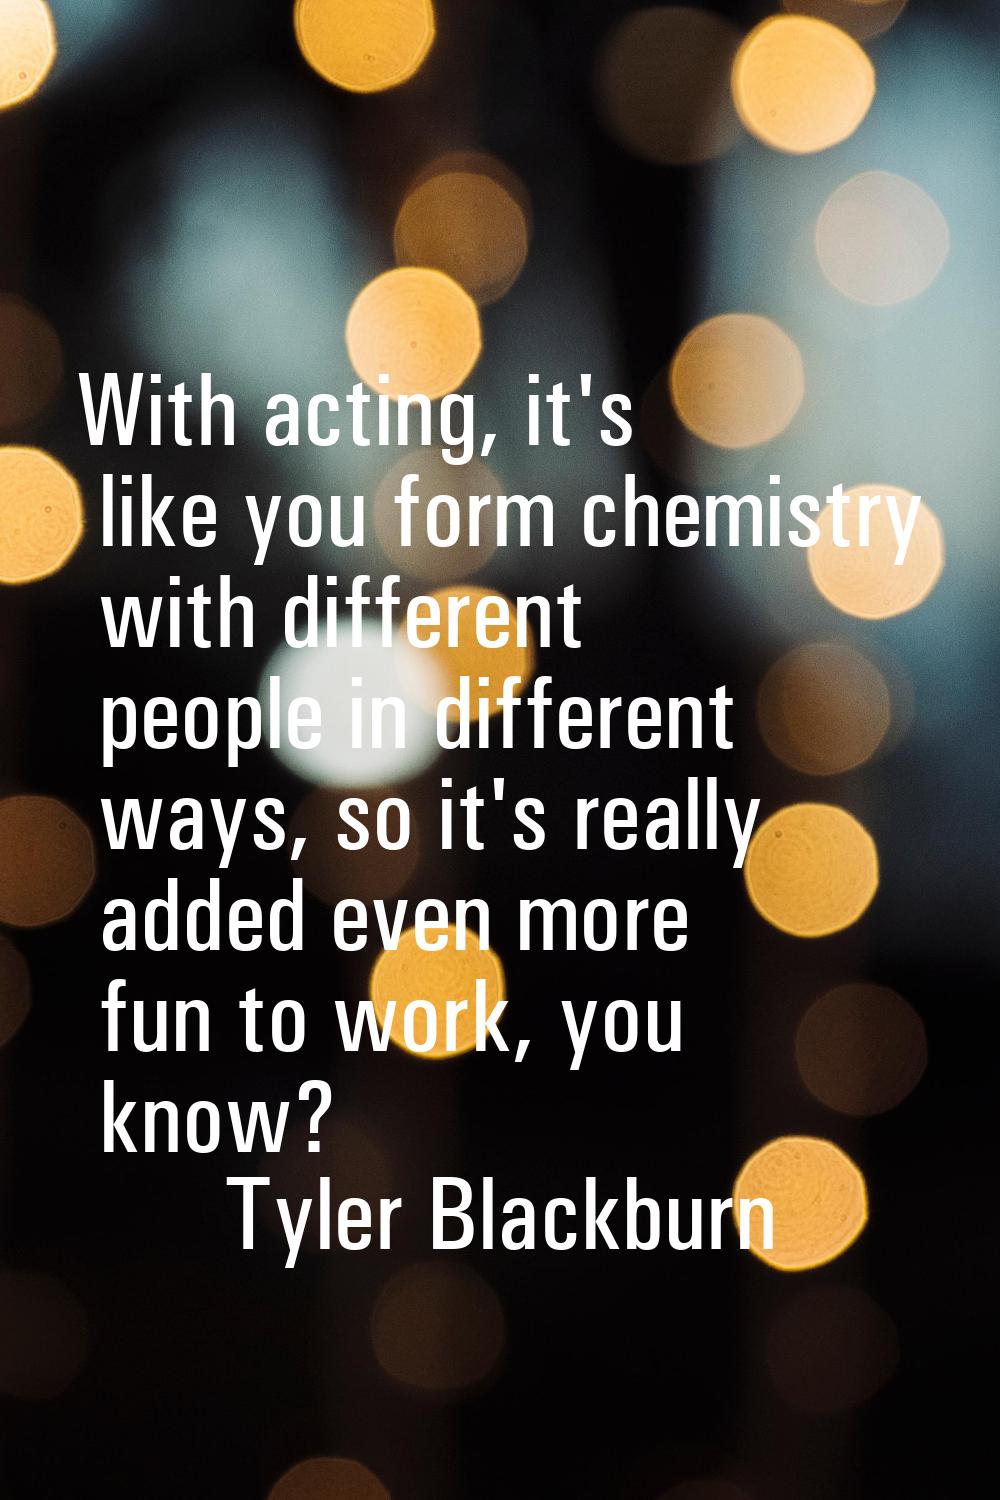 With acting, it's like you form chemistry with different people in different ways, so it's really a